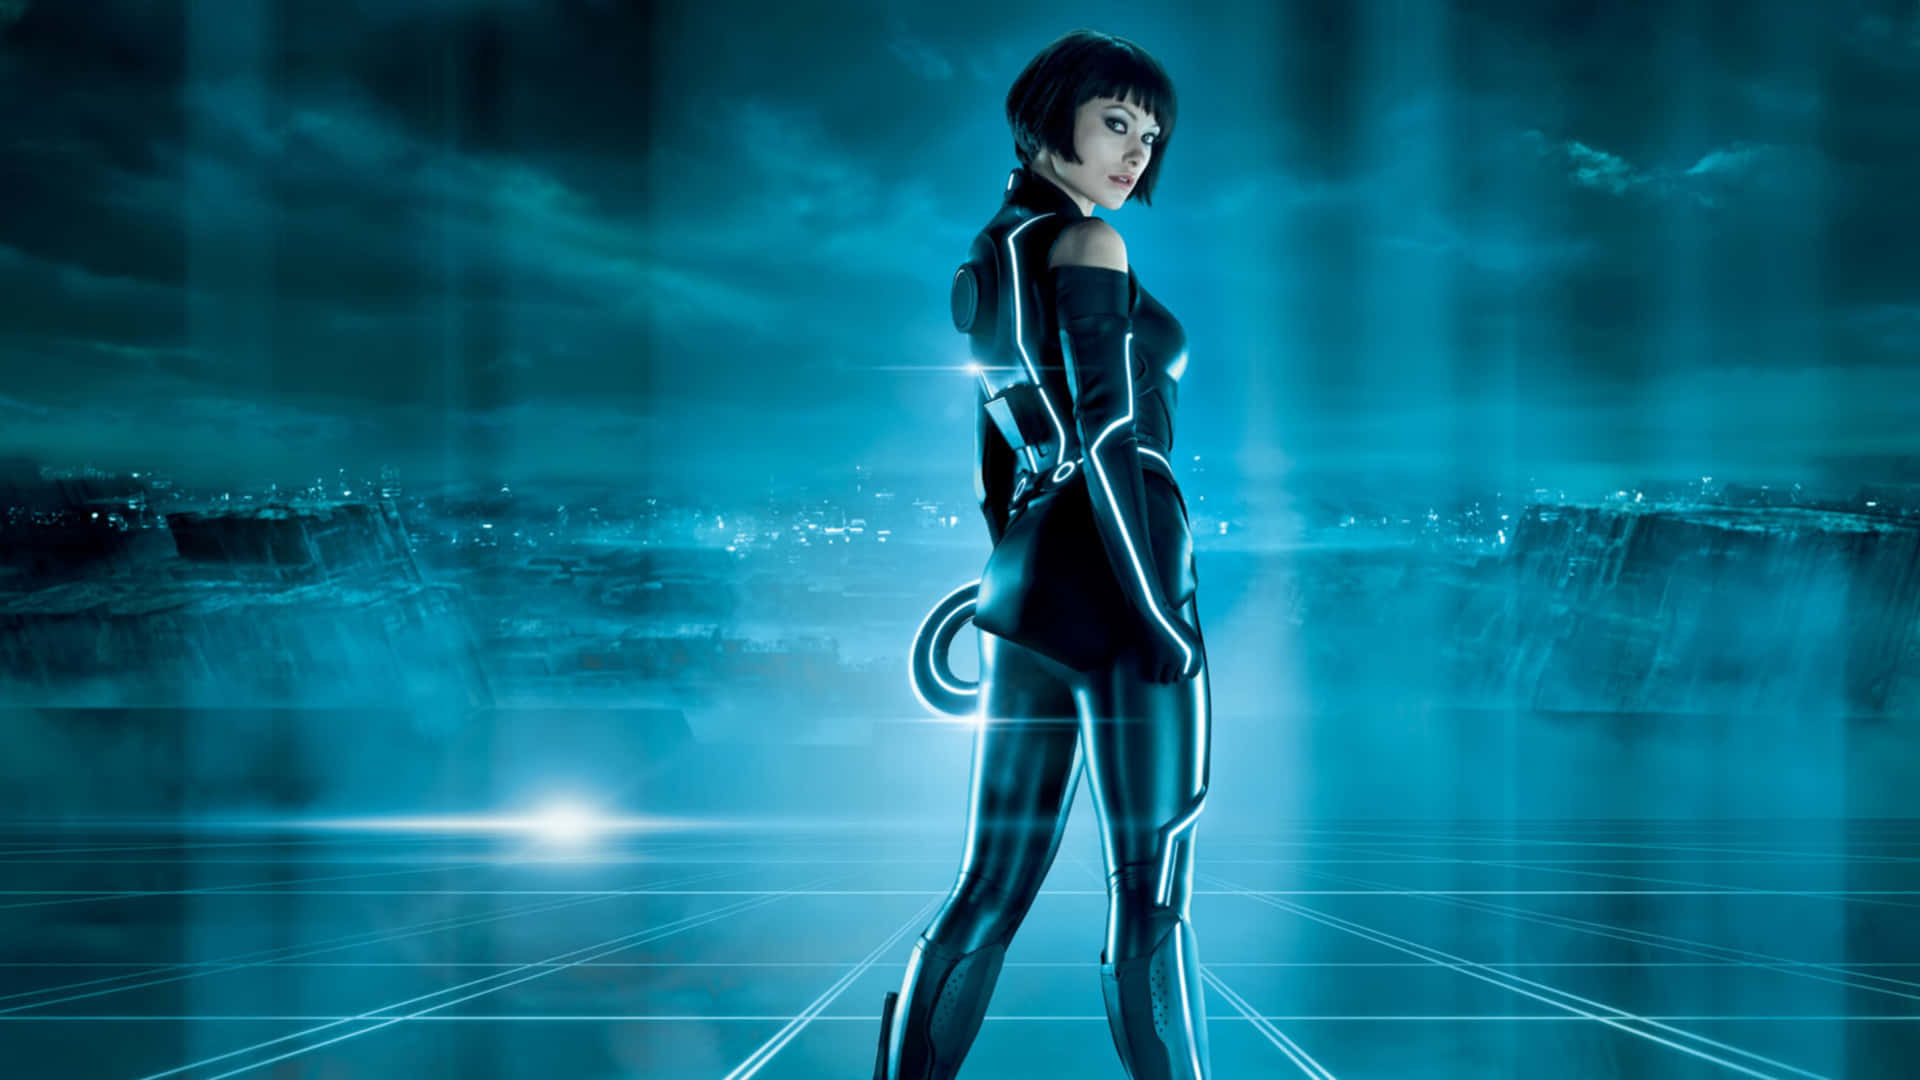 The vibrant lights dance in the darkness of the Tron Legacy world Wallpaper